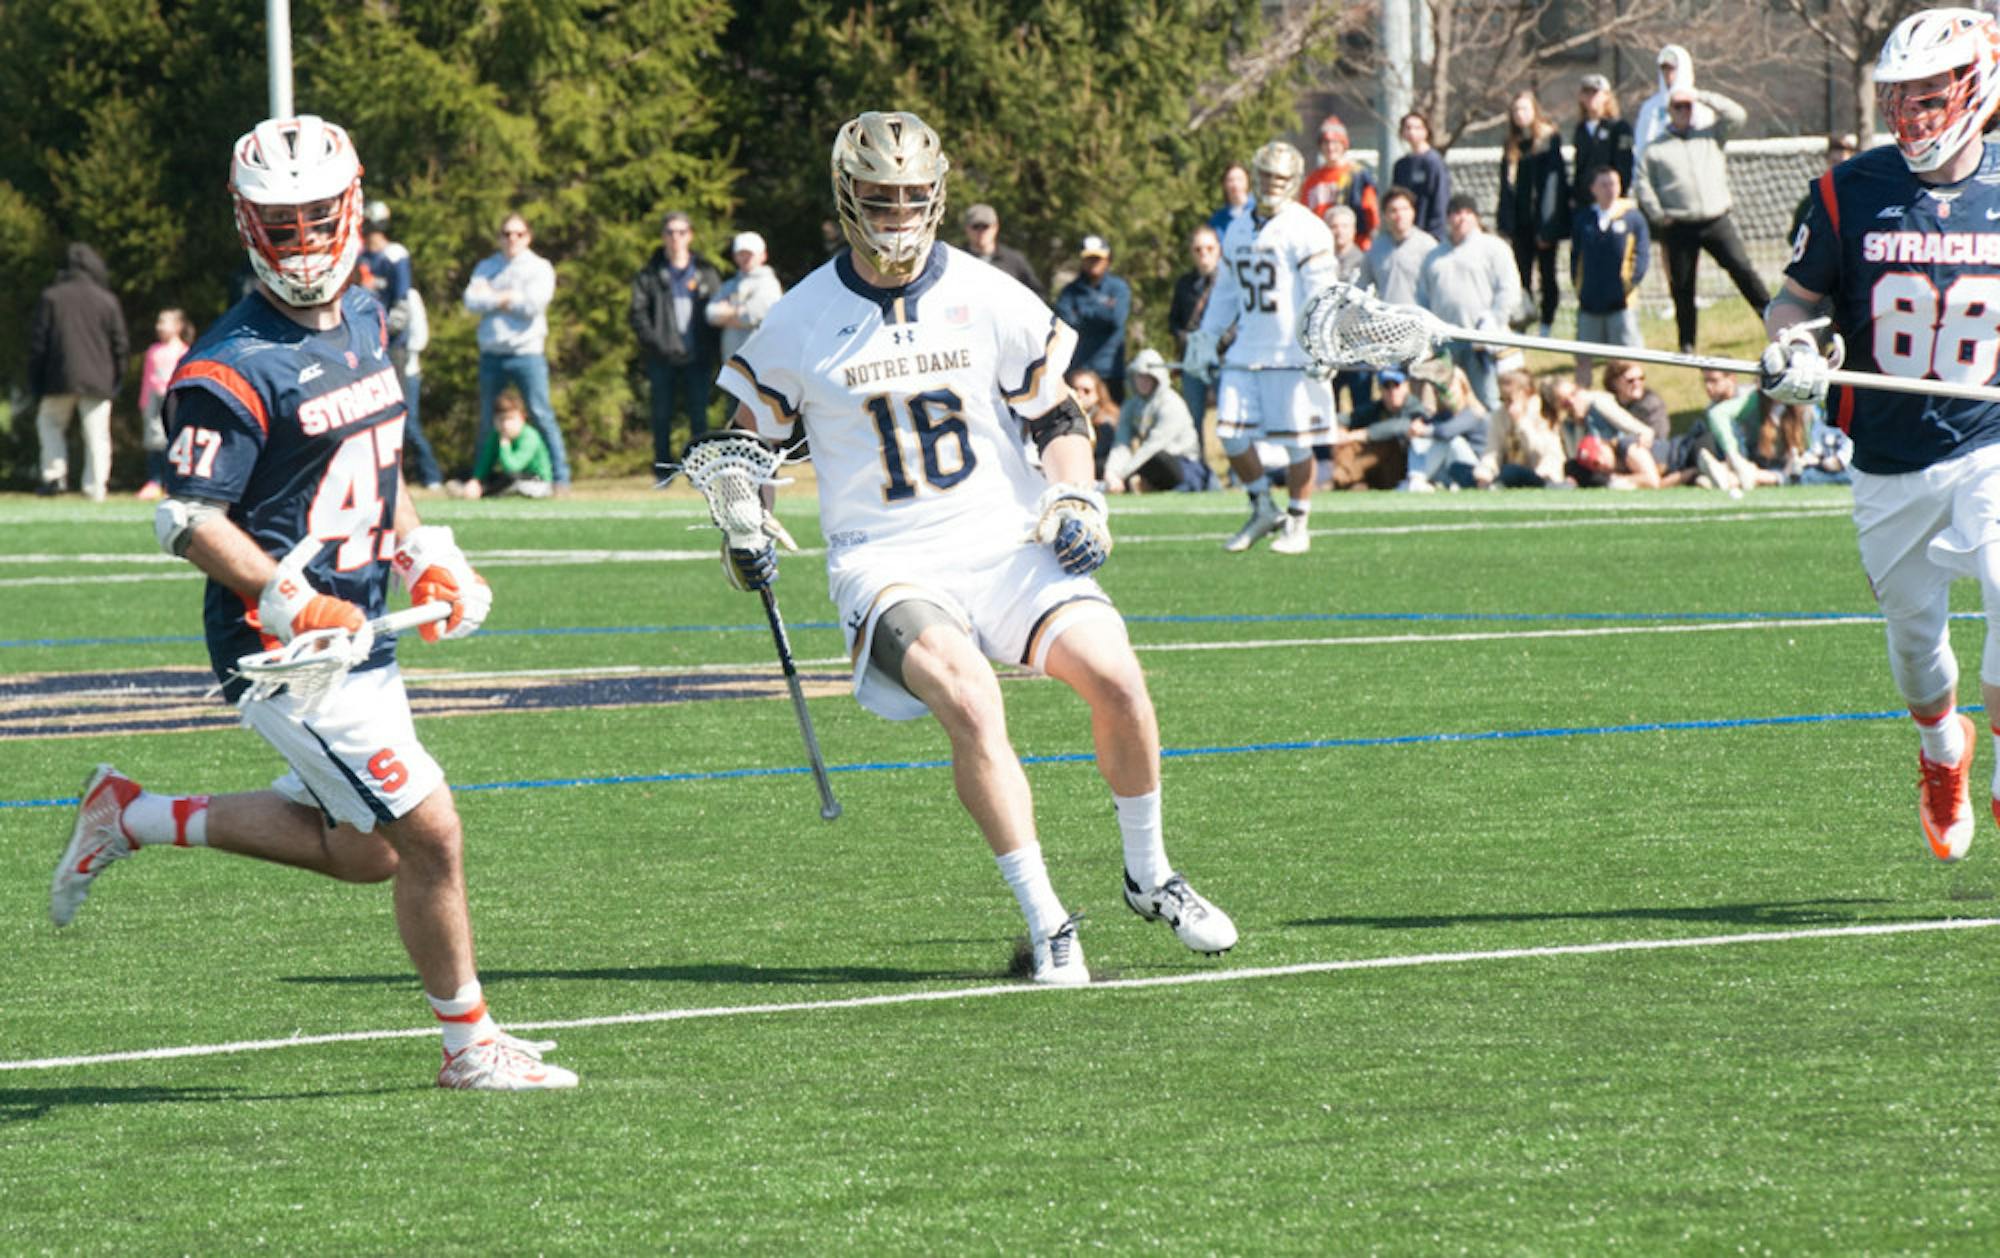 Irish senior captain midfielder Sergio Perkovic cradles the ball during Notre Dame’s 11-10 loss to Syracuse on Saturday at Arlotta Stadium. Perkovic tallied one goal and two assists in the game.